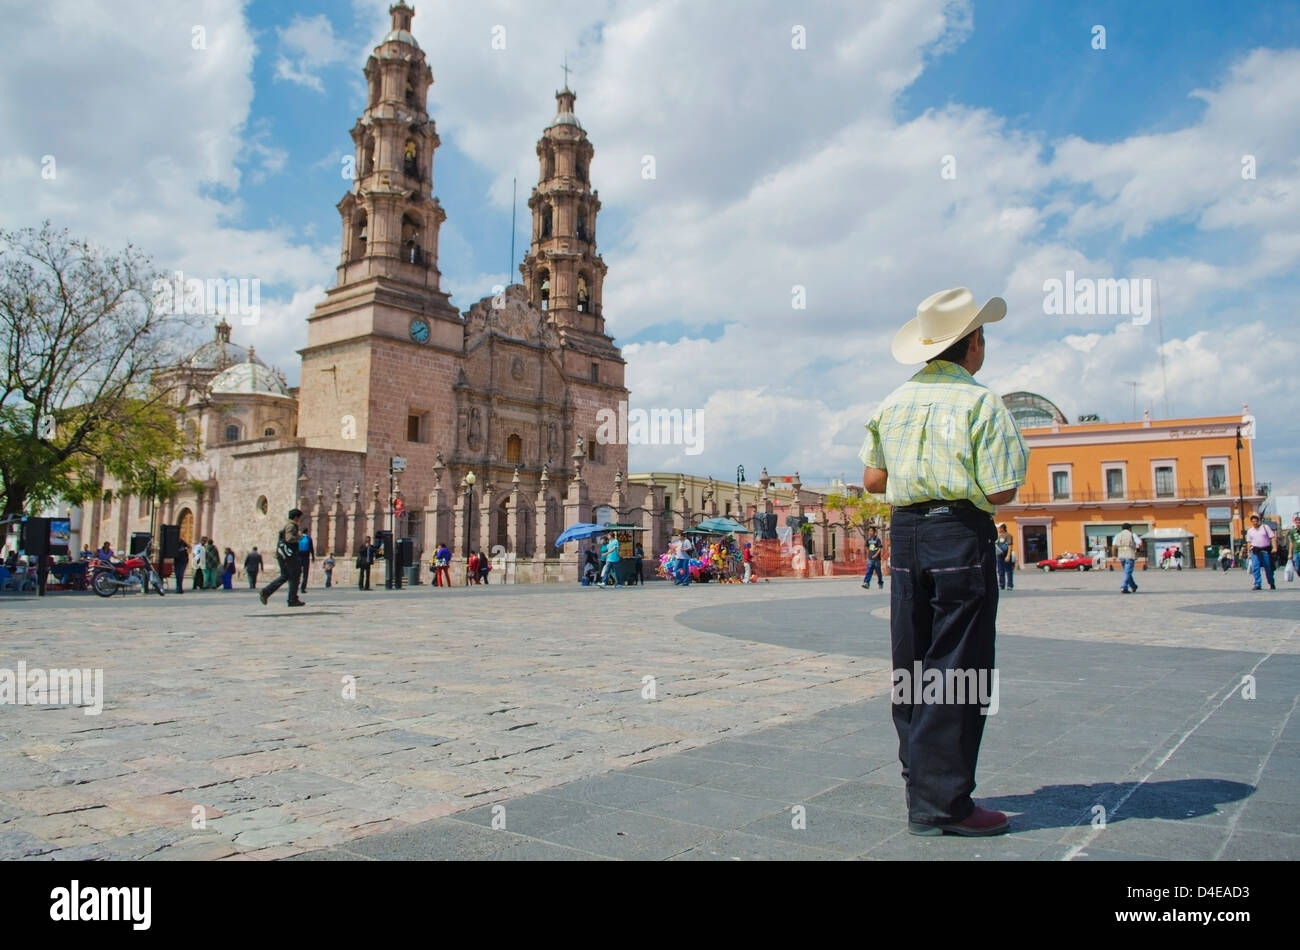 Man wearing cowboy hat standing in large city plaza beside large cathedral; Aguascalientes, Aguascalientes state, Mexico Stock Photo